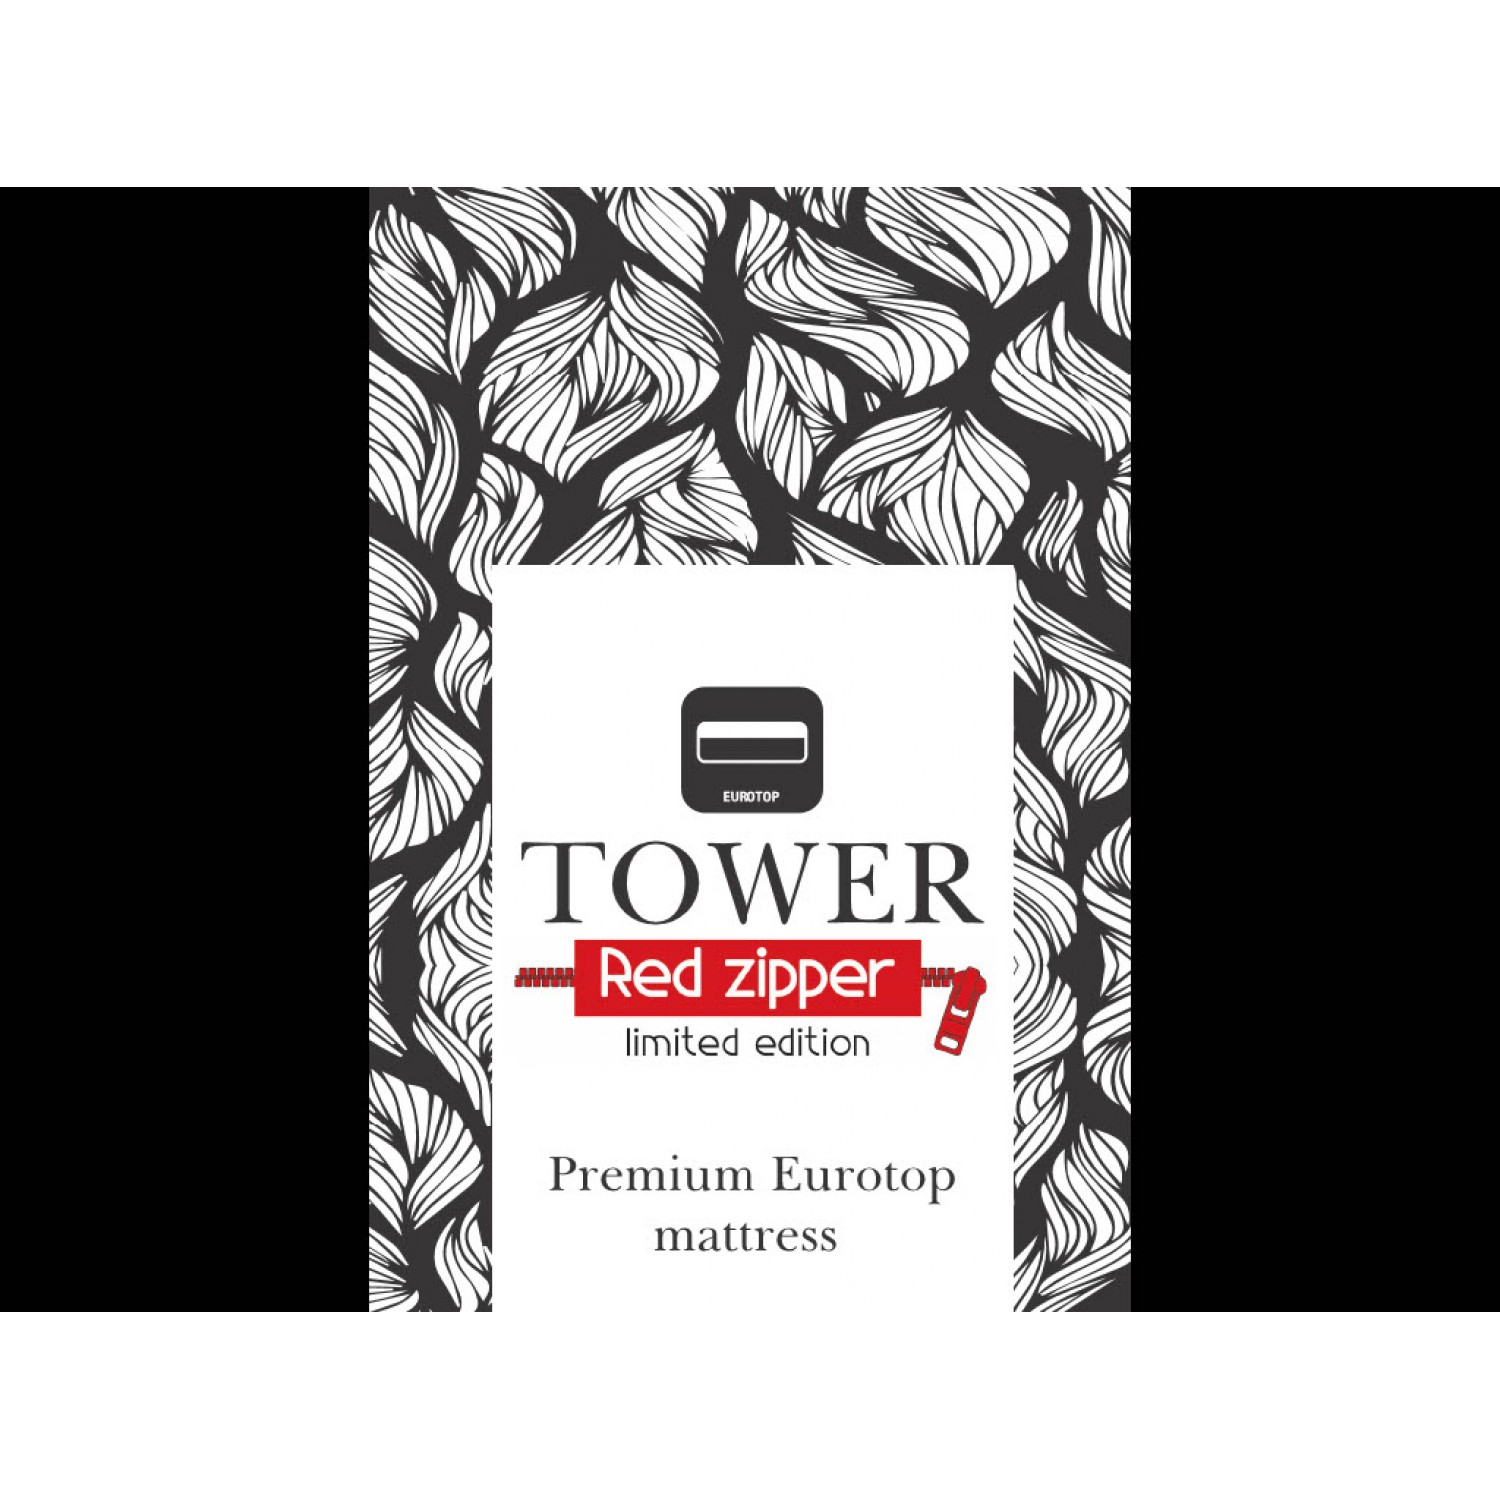 TOWER - Red Zipper_Limited Edition